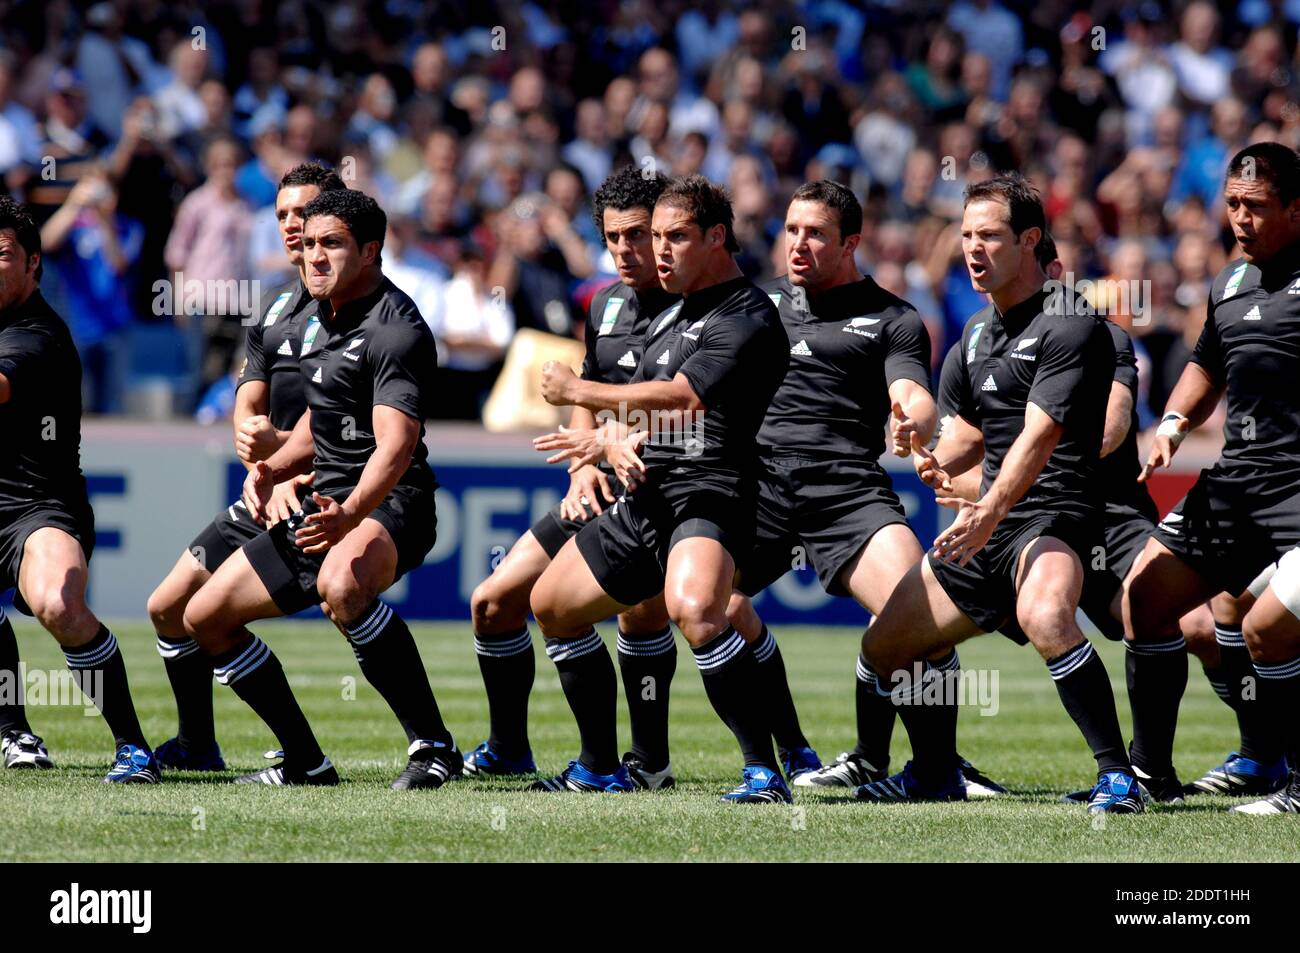 New Zealand's rugby team players playing the Maori's haka dance at the rugby match Italy vs New Zealand, during the Rugby World Cup of France 2007. Stock Photo